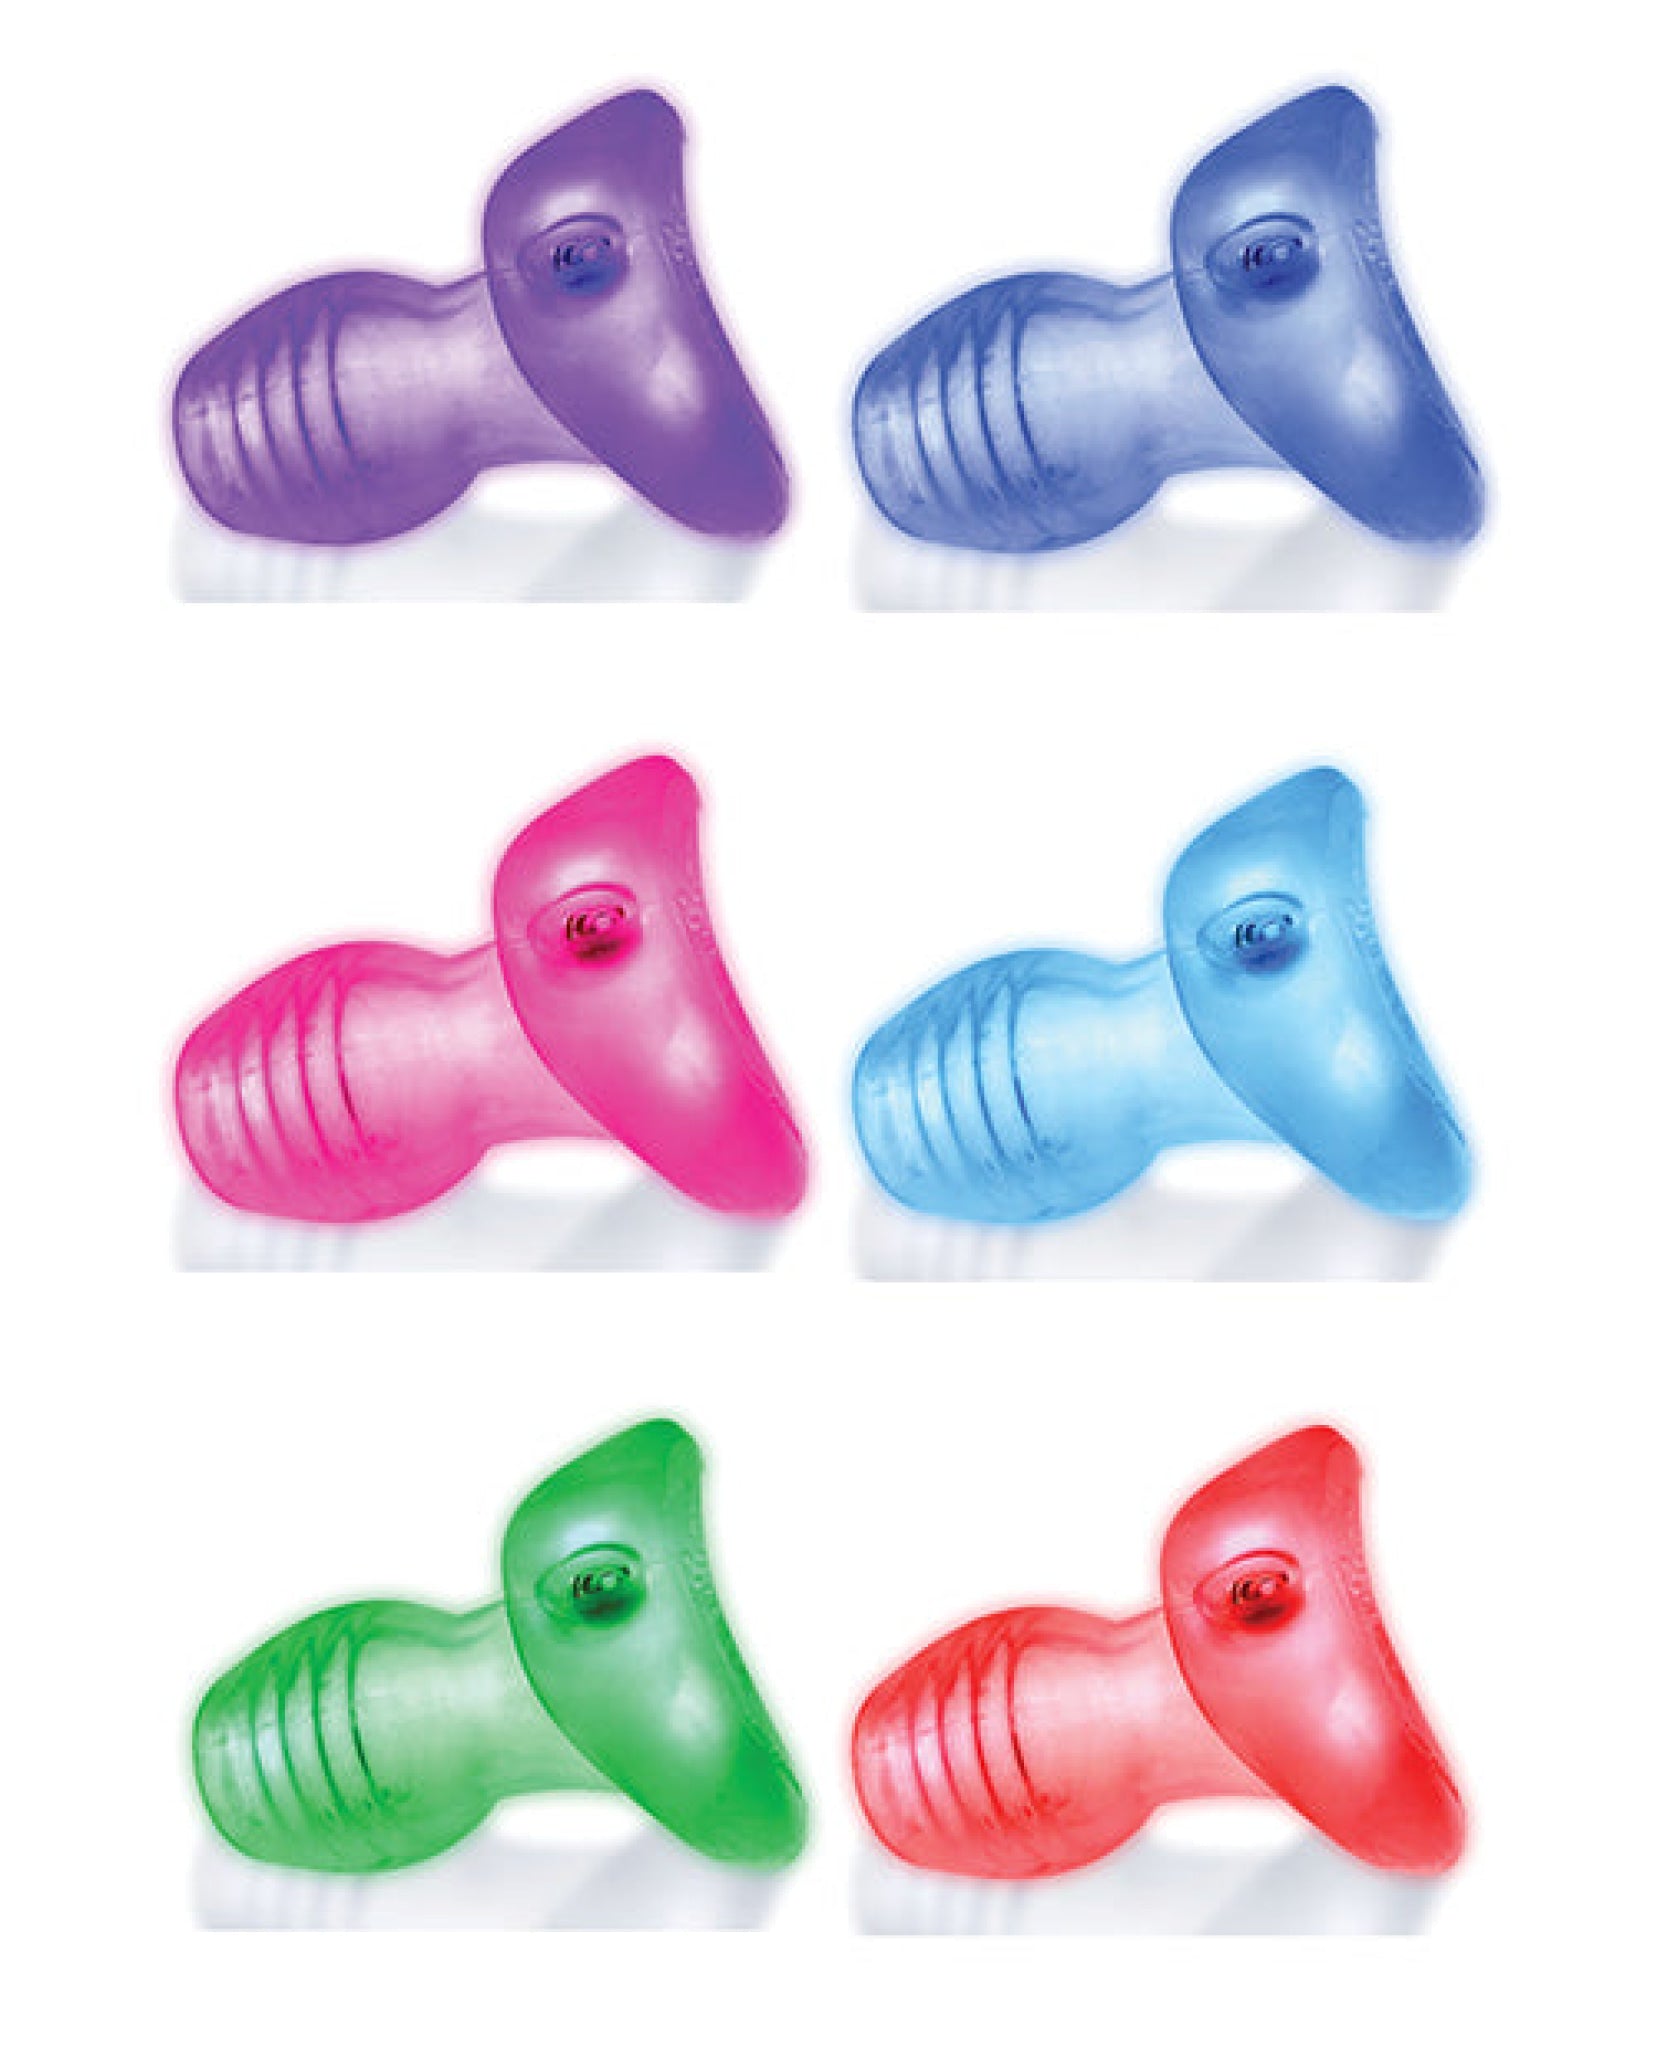 Oxballs Glowhole 1 Hollow Buttplug W-led Insert Small - Clear Hunky Junk